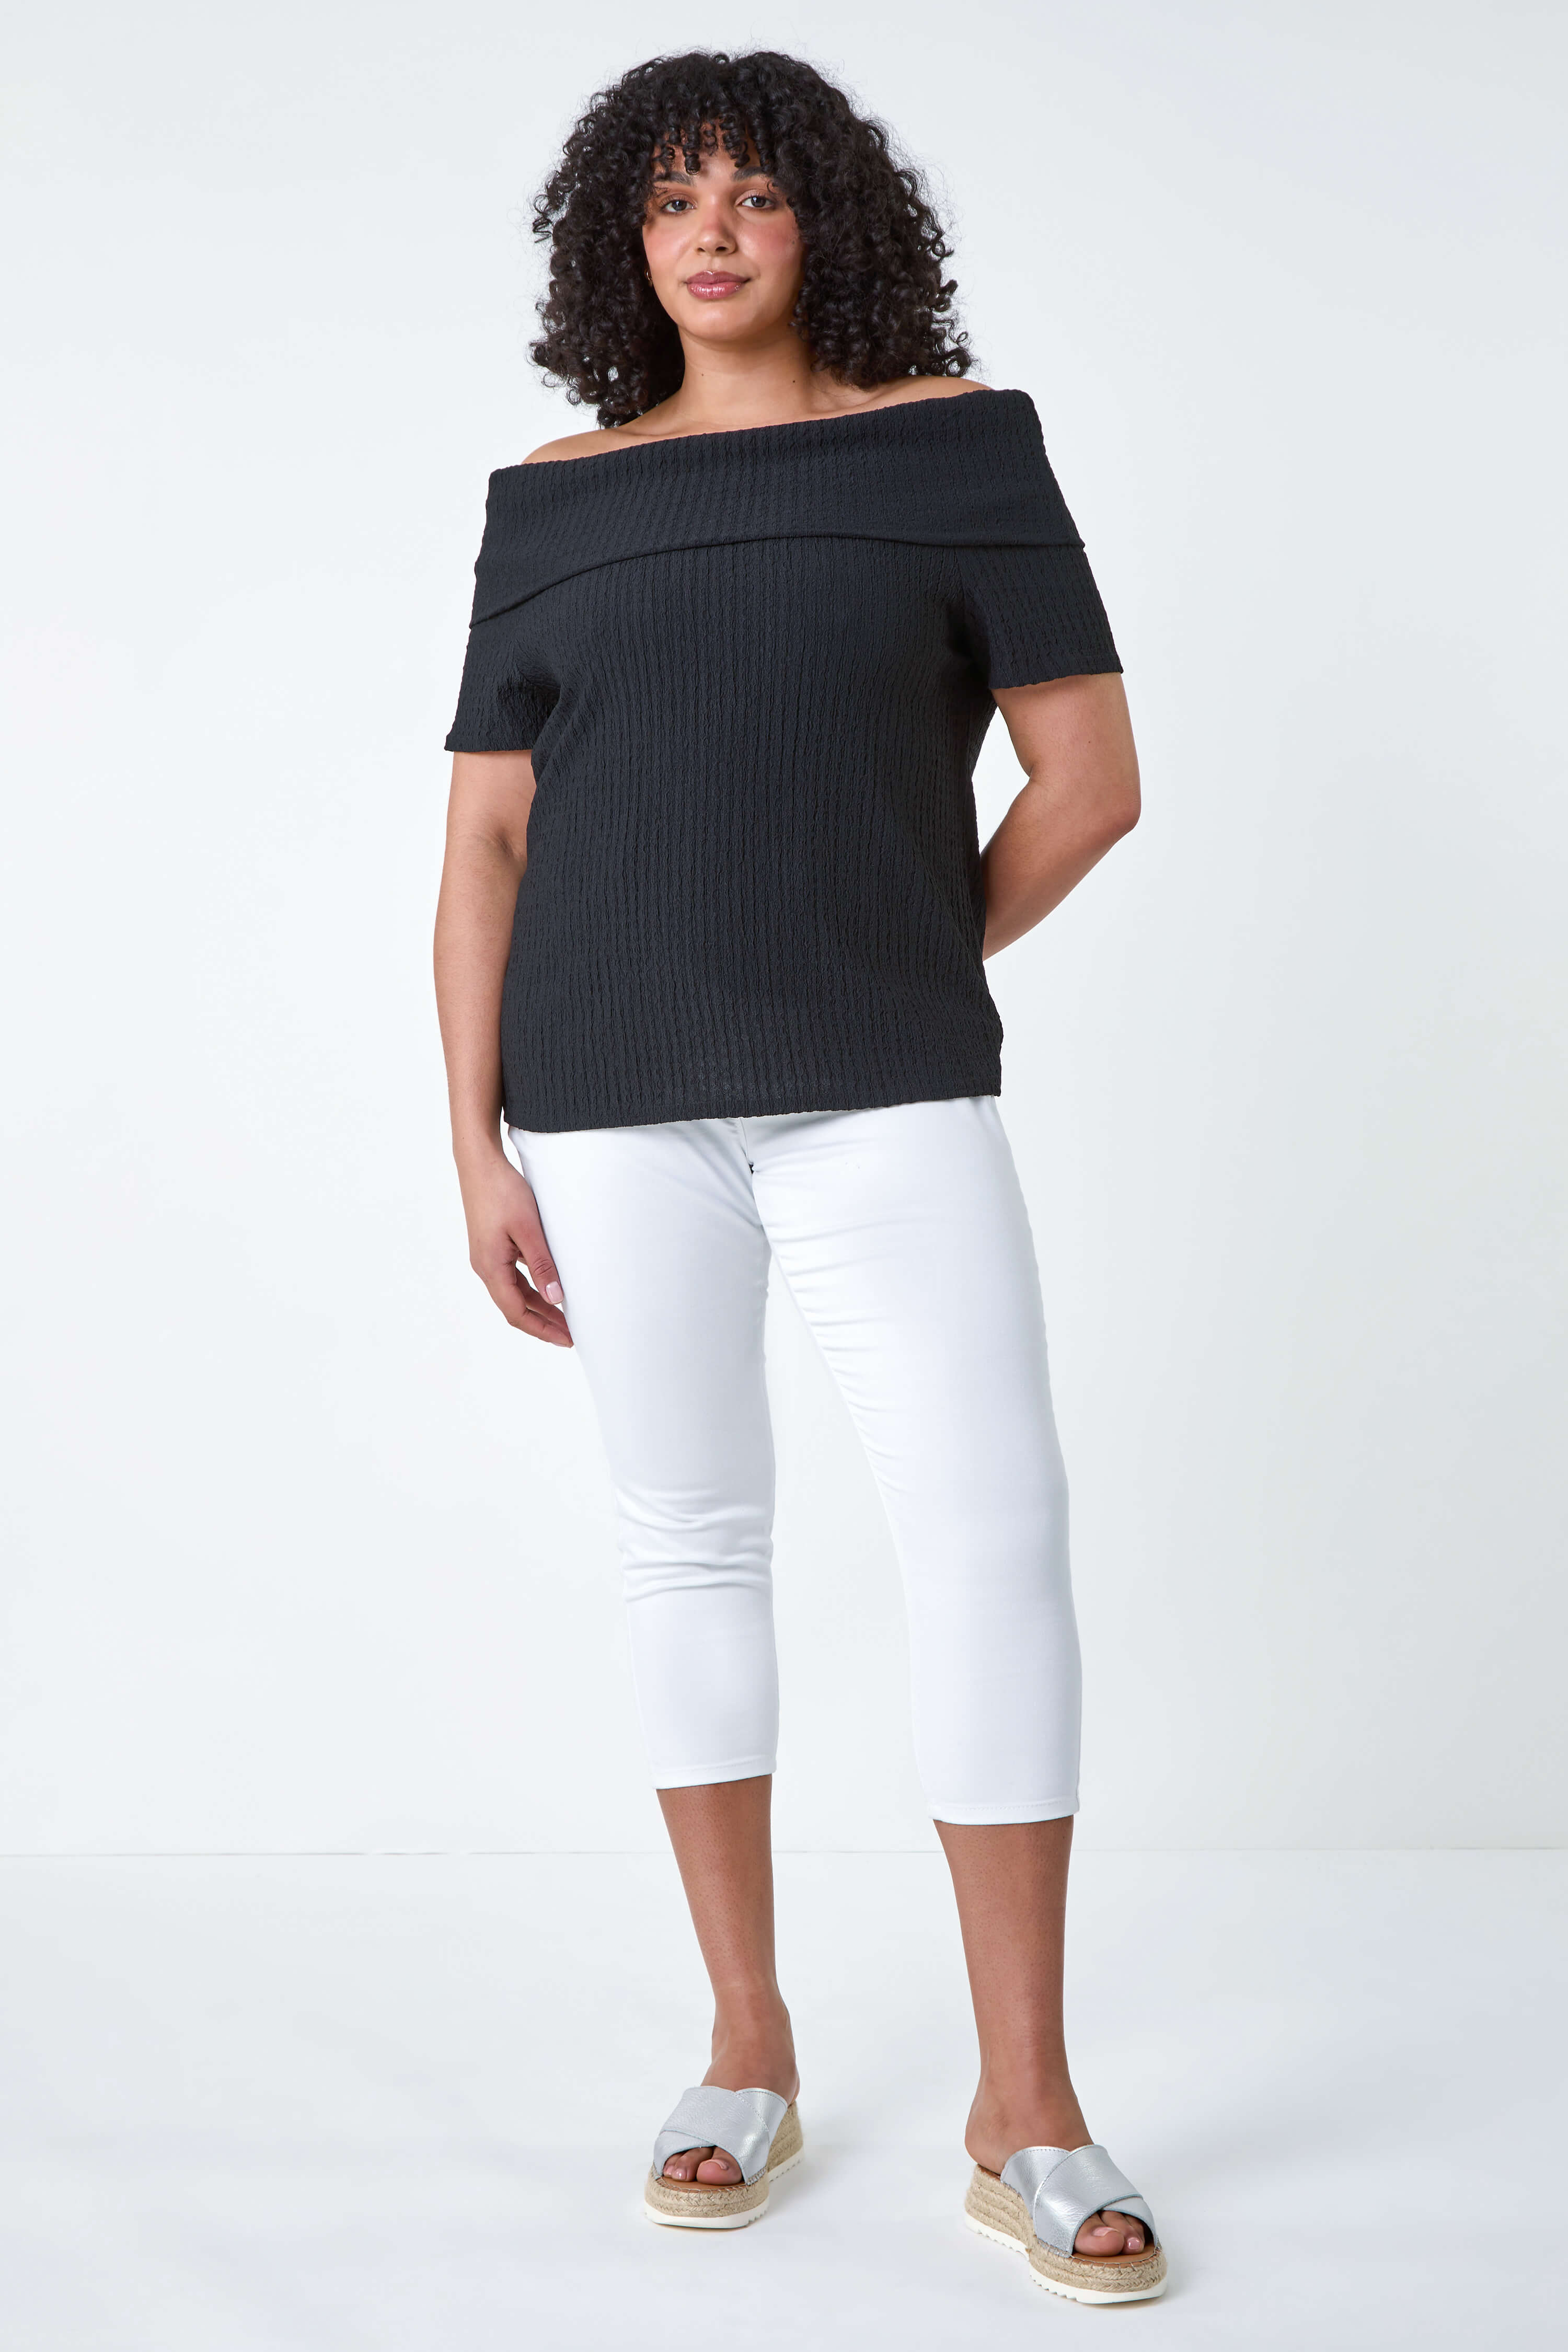 Black Curve Textured Stretch Bardot Top, Image 2 of 5